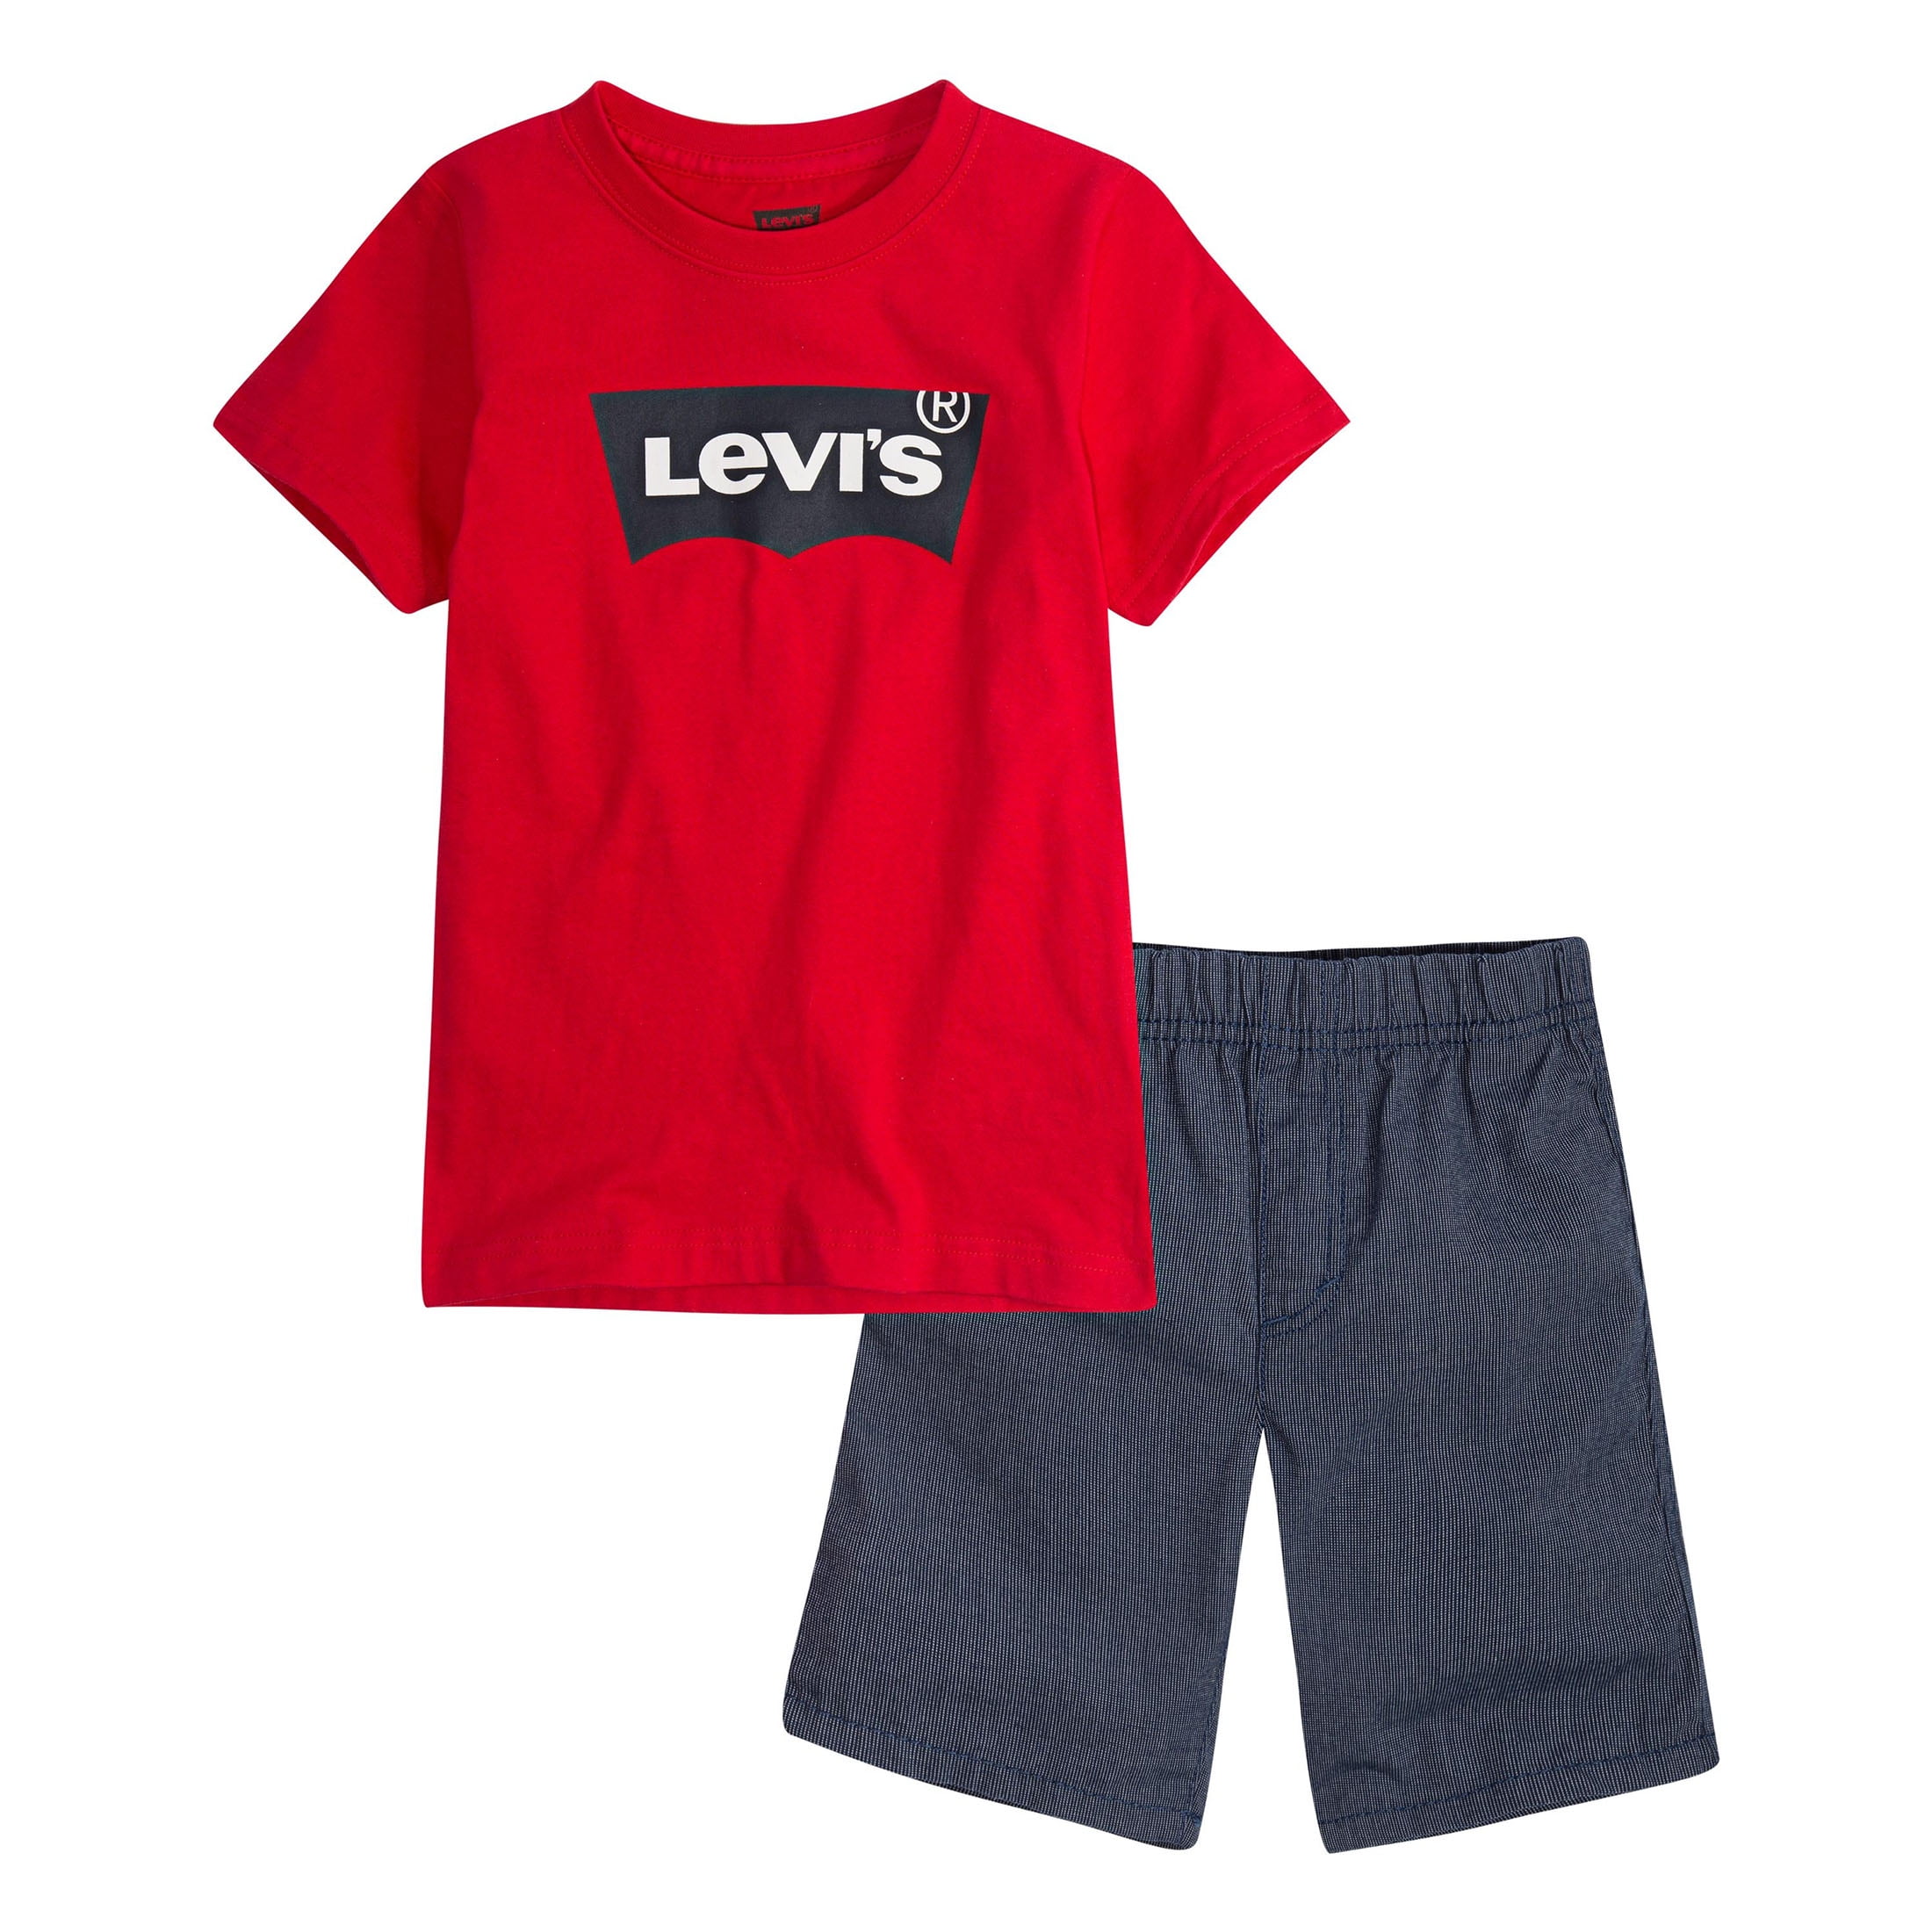 Fortnite Games Girls T-Shirt Shorts Sets,Boys Piece Outfit and Shorts Outfit Round Neck Set,Sport T-Shirt Suits 2 Piece Set